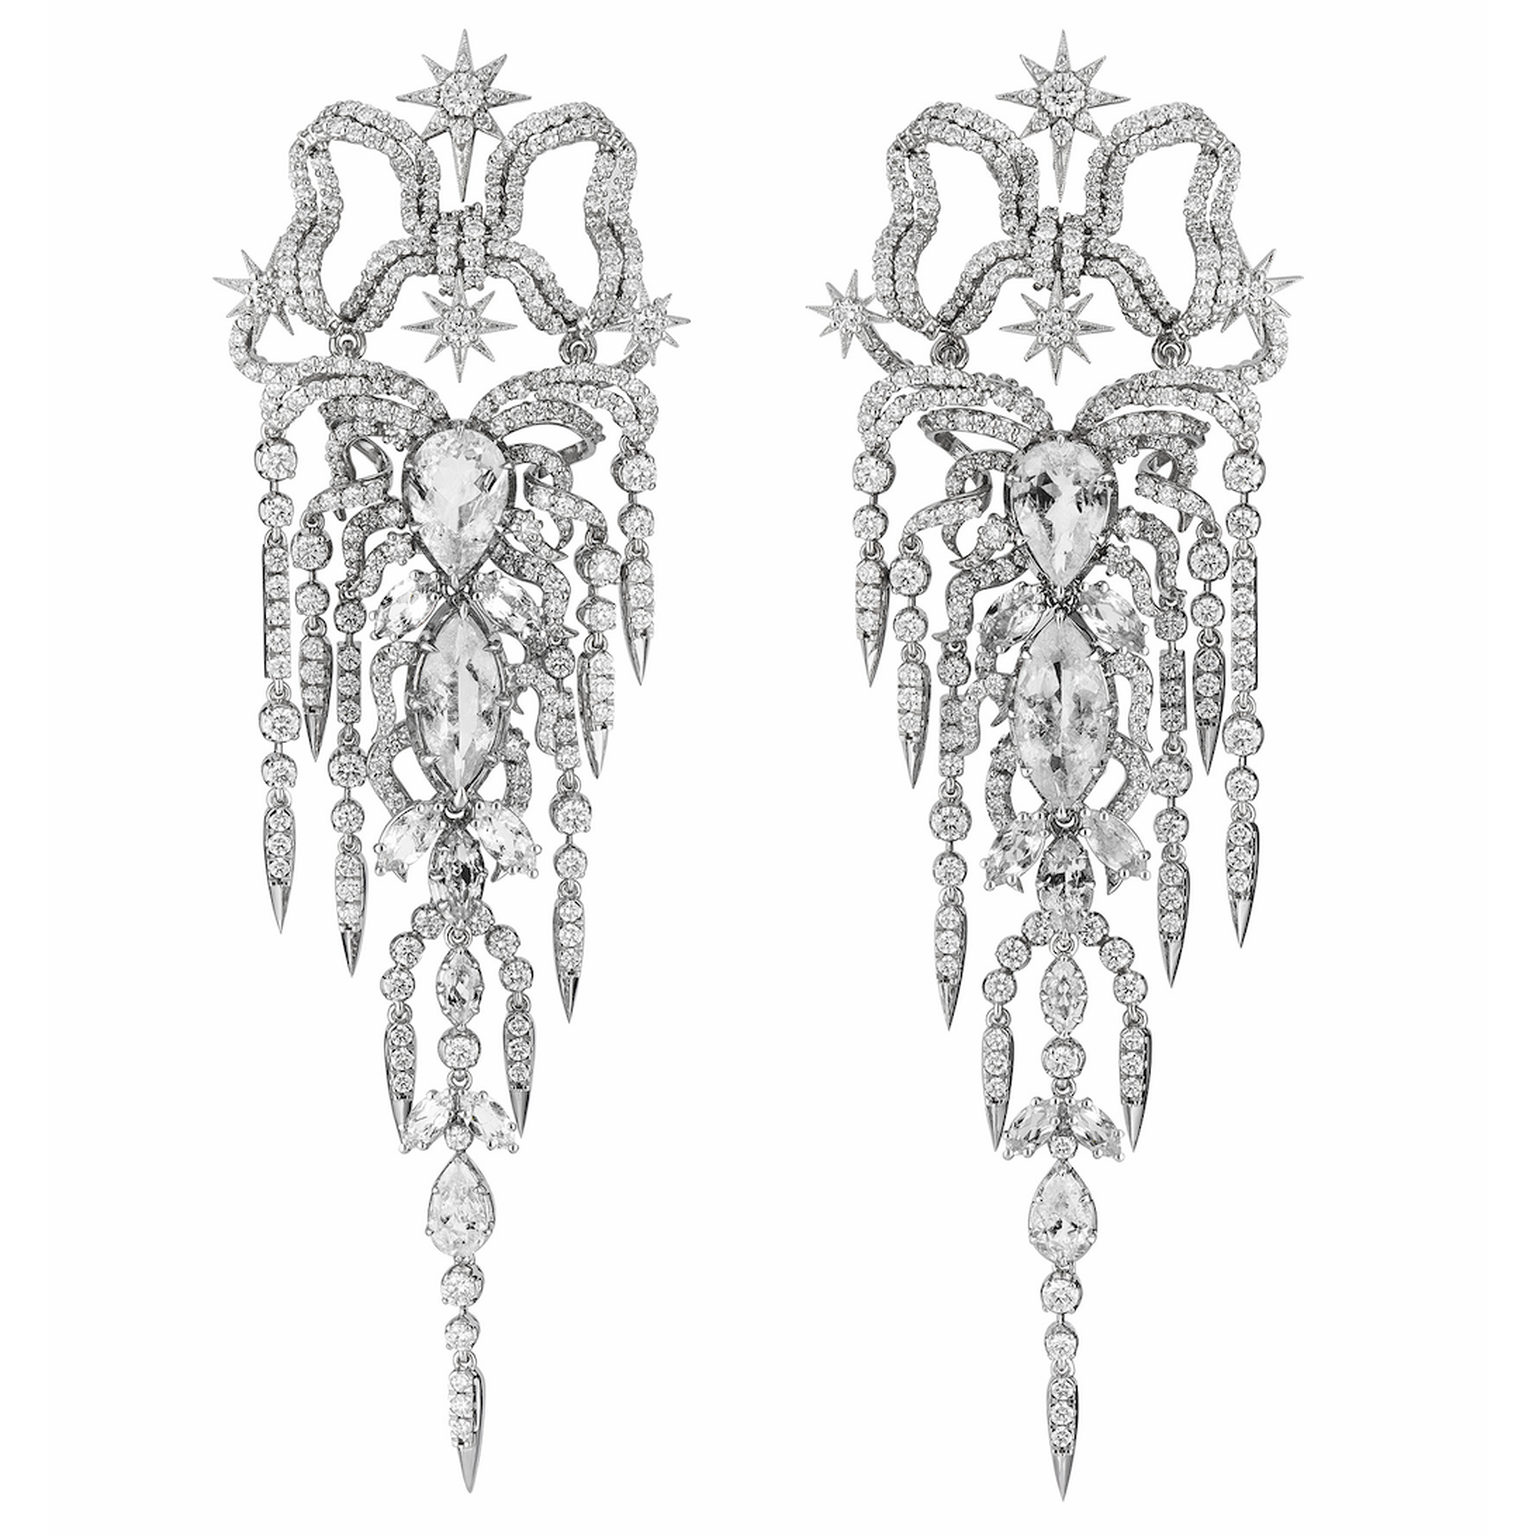 Hortus Deliciarum high jewellery earrings by Gucci 